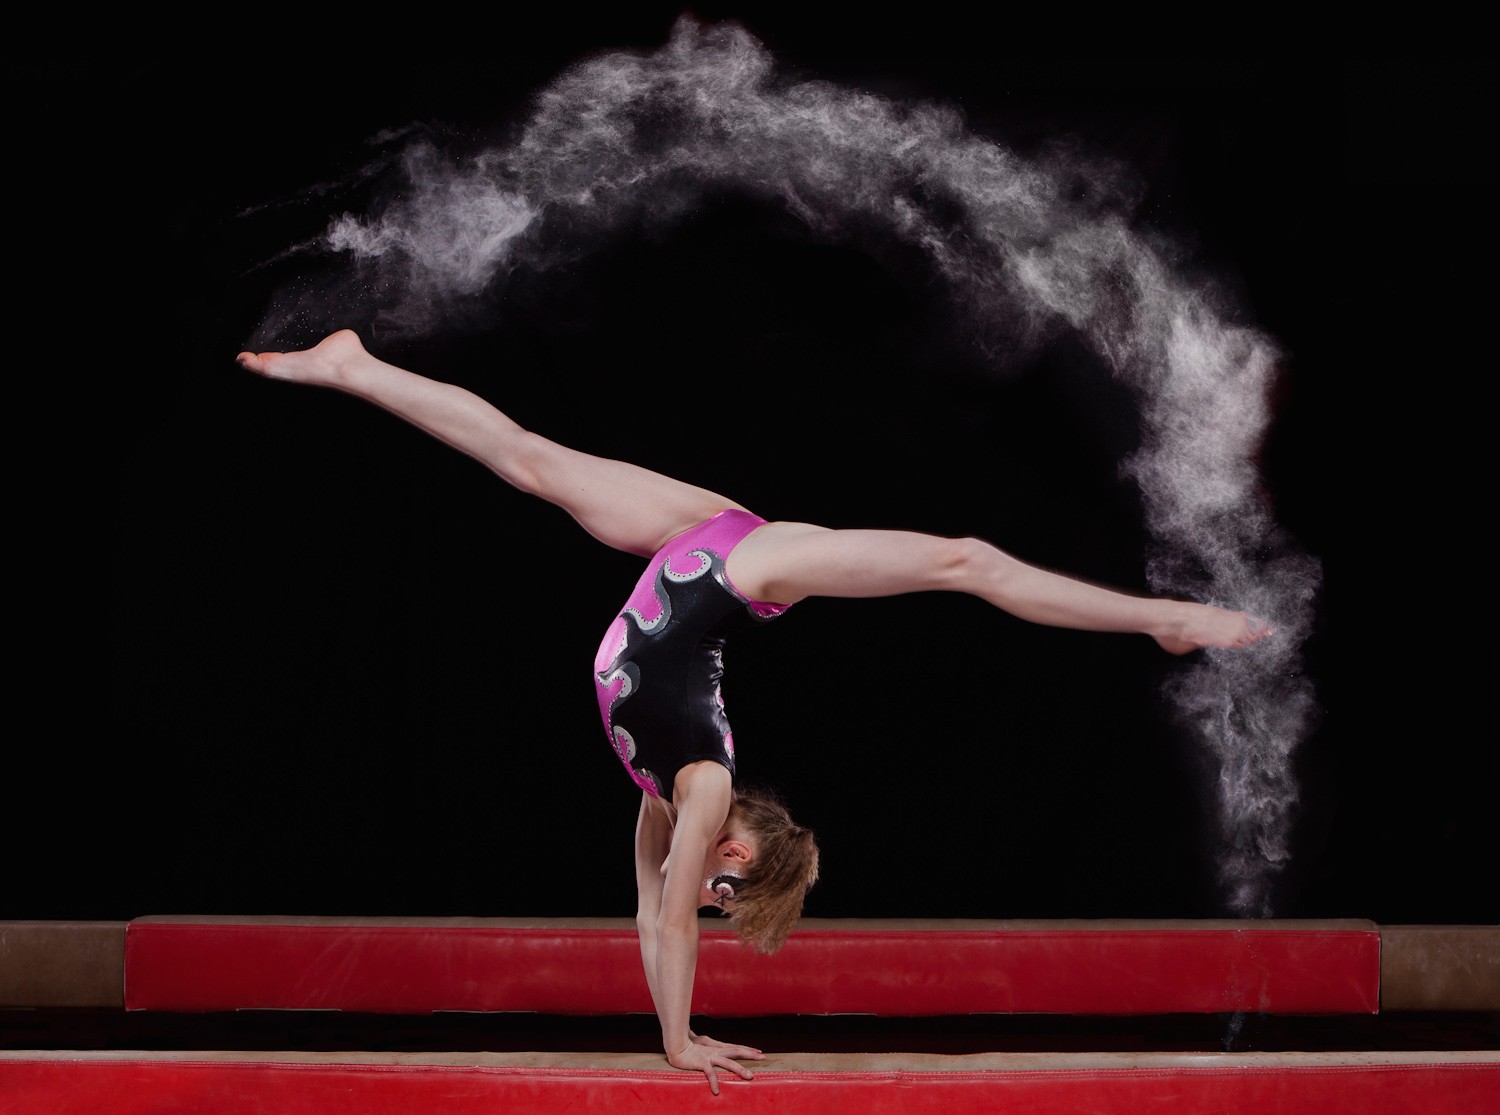 Free Download Gymnastics Wallpapers High Quality Download Free [1920x1200] For Your Desktop